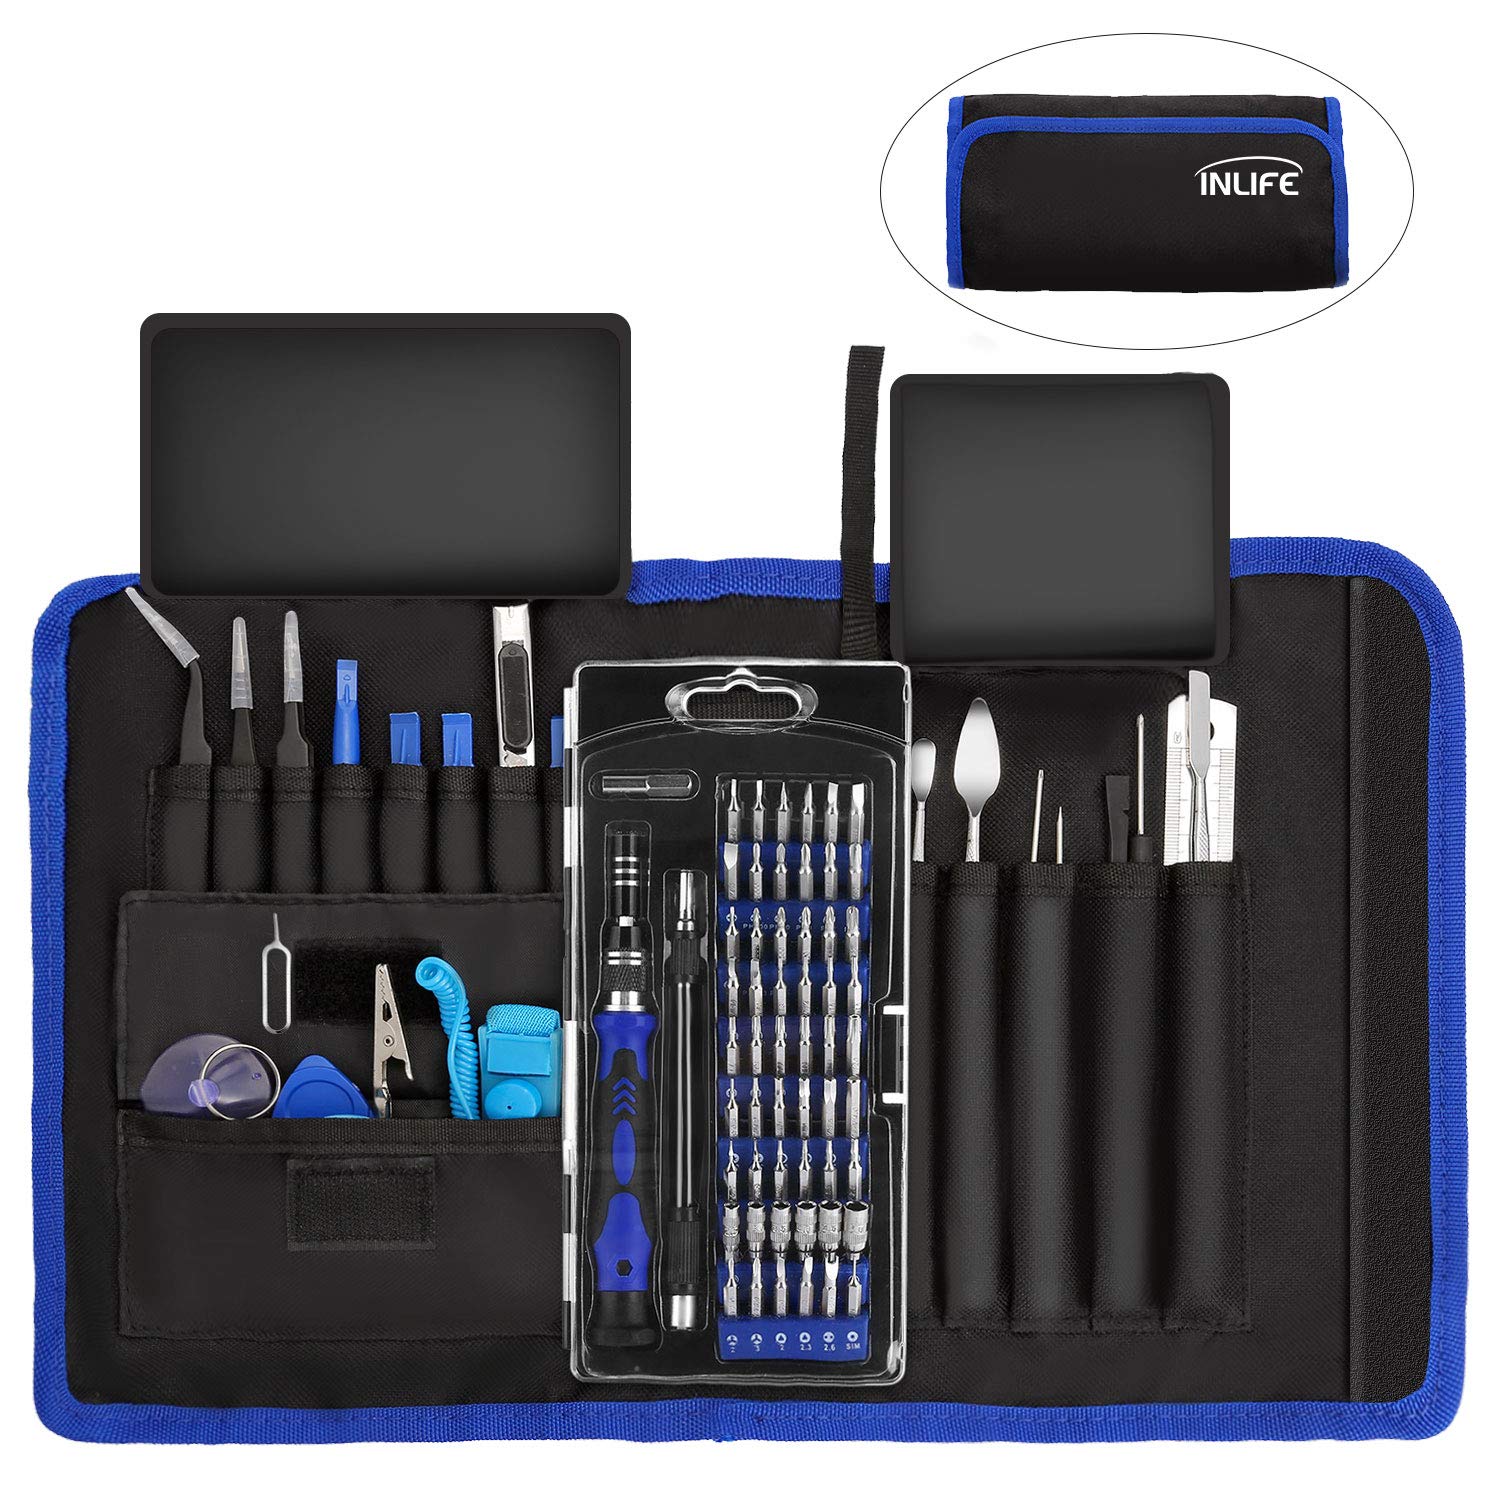 Book Cover 81 in 1 Professional Electronics Magnetic Driver Kit with Portable Bag for Laptop, iPhone, iPad, Cellphone, PC, Computer,iPod,Repair Tools Kit, Precision Screwdriver Set with Flexible Shaft